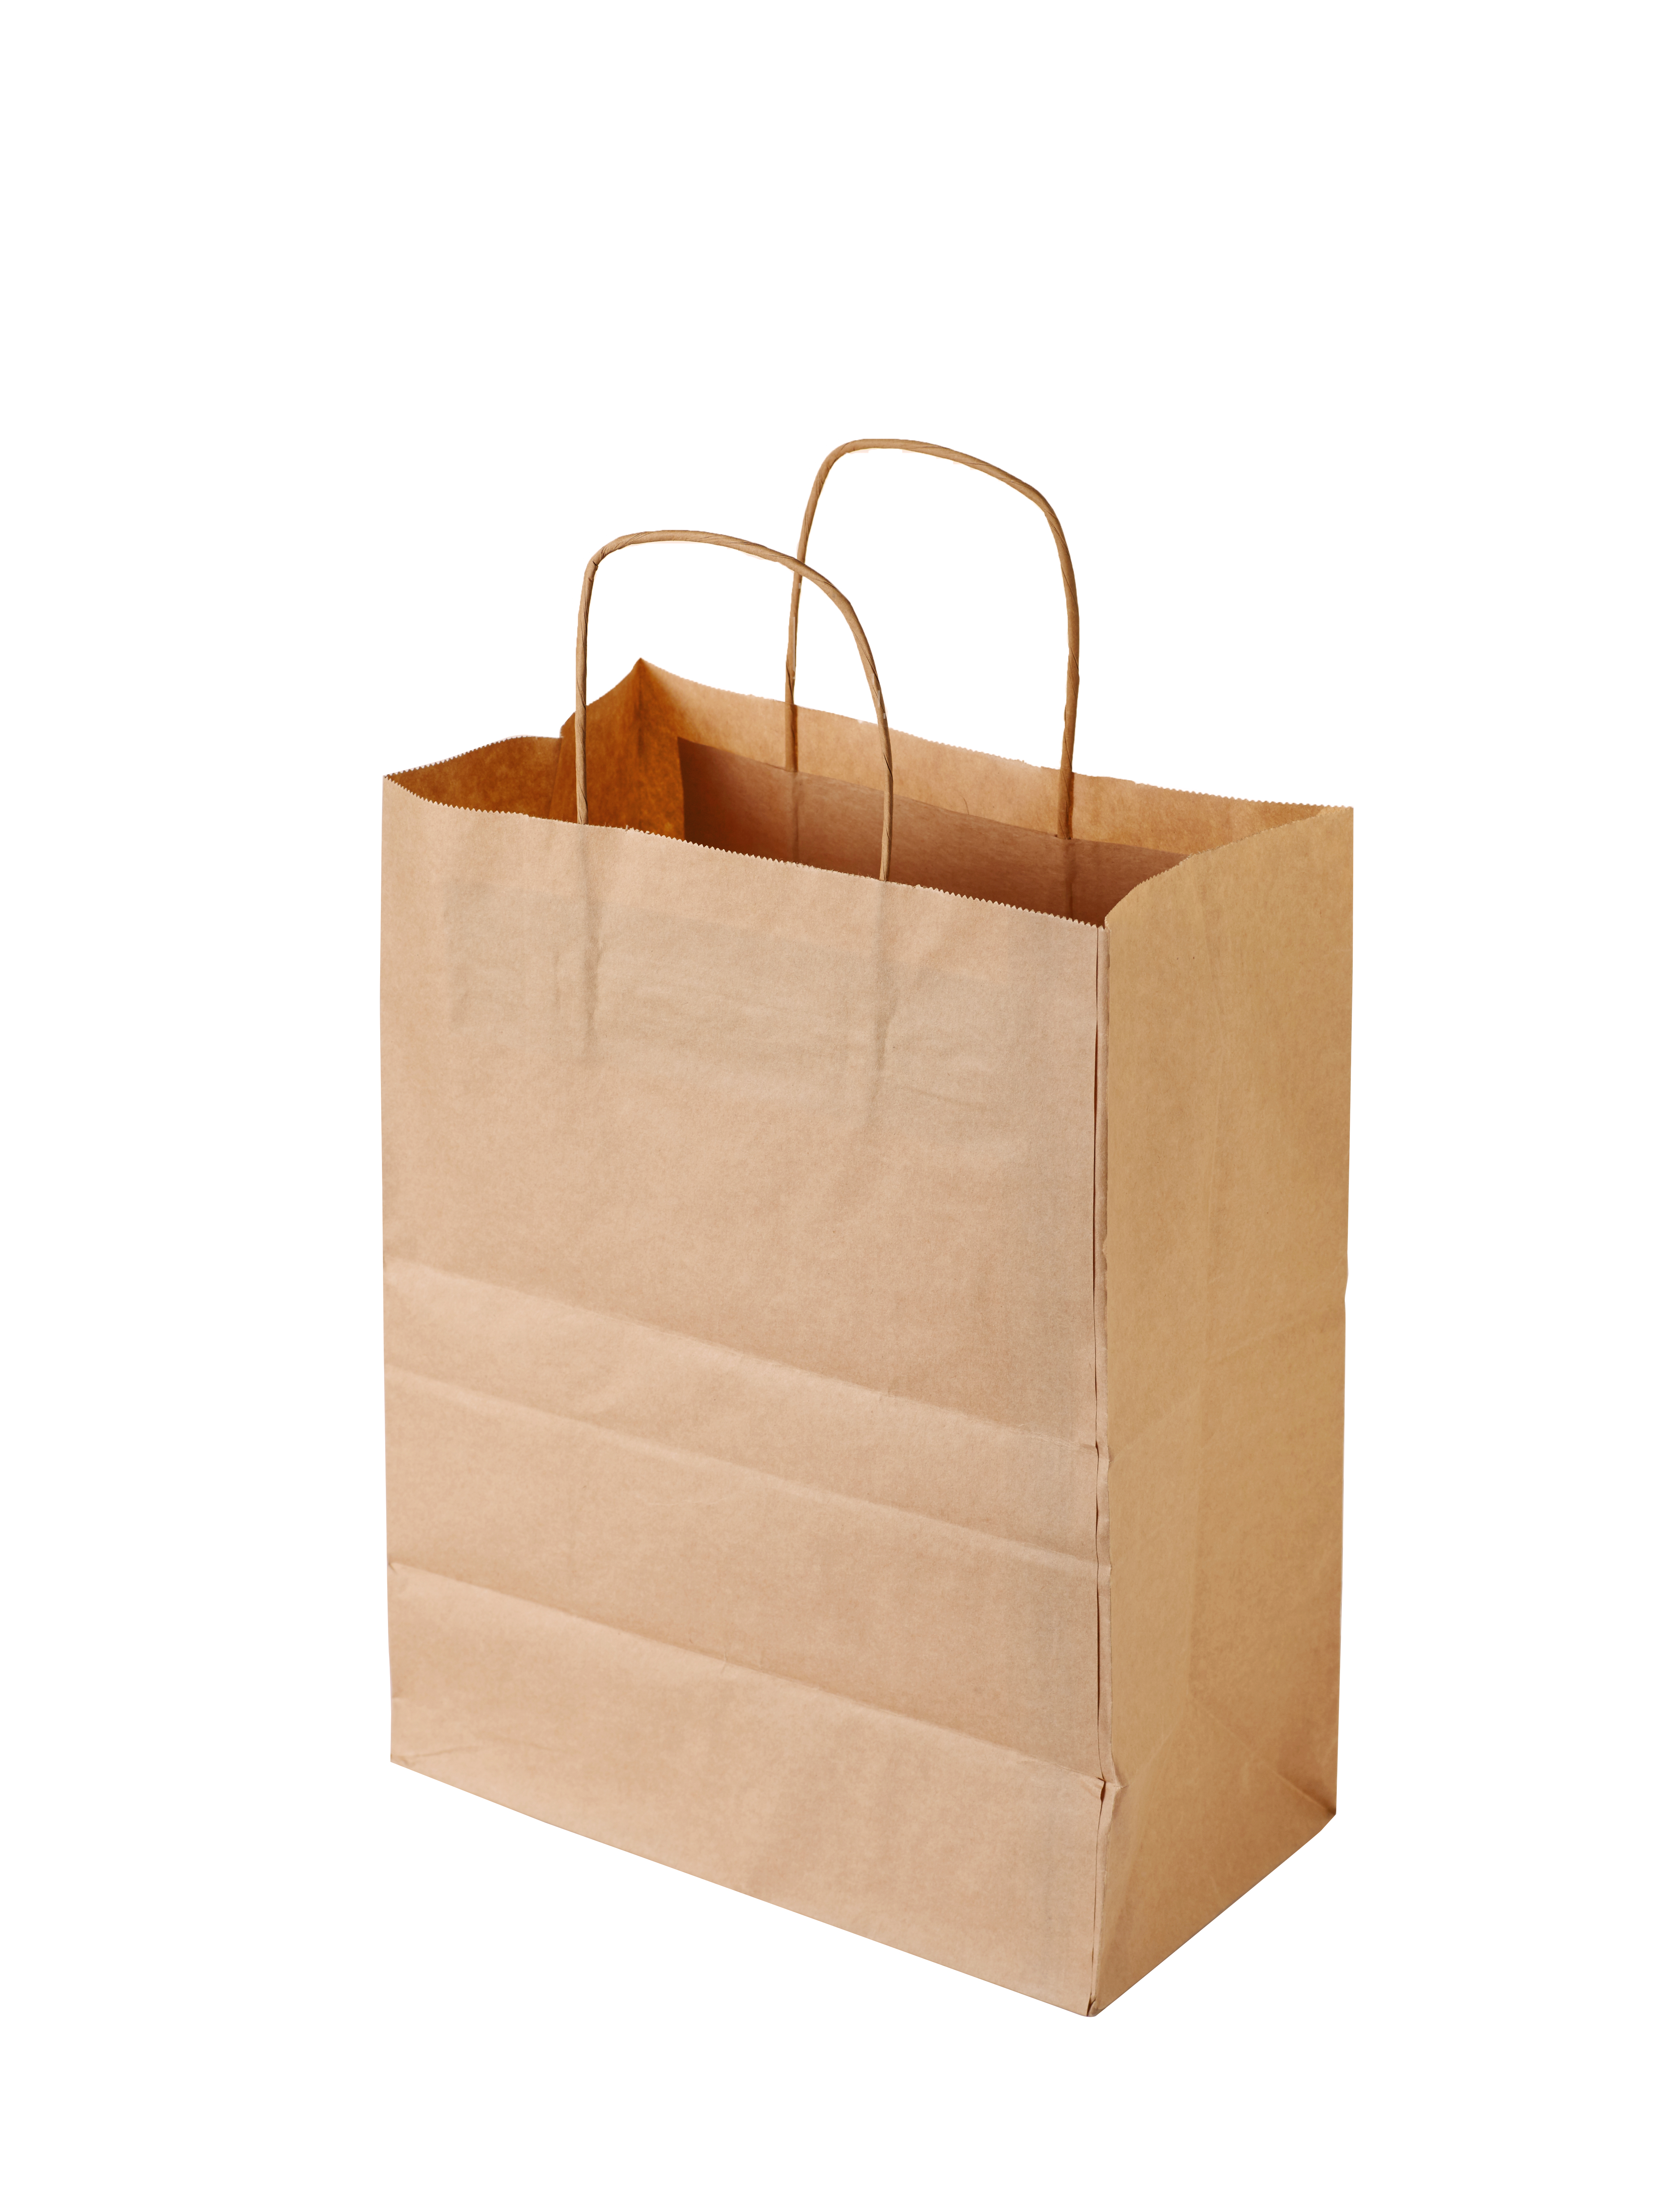 OSQ CarrBag tw 320 paper bags with handles